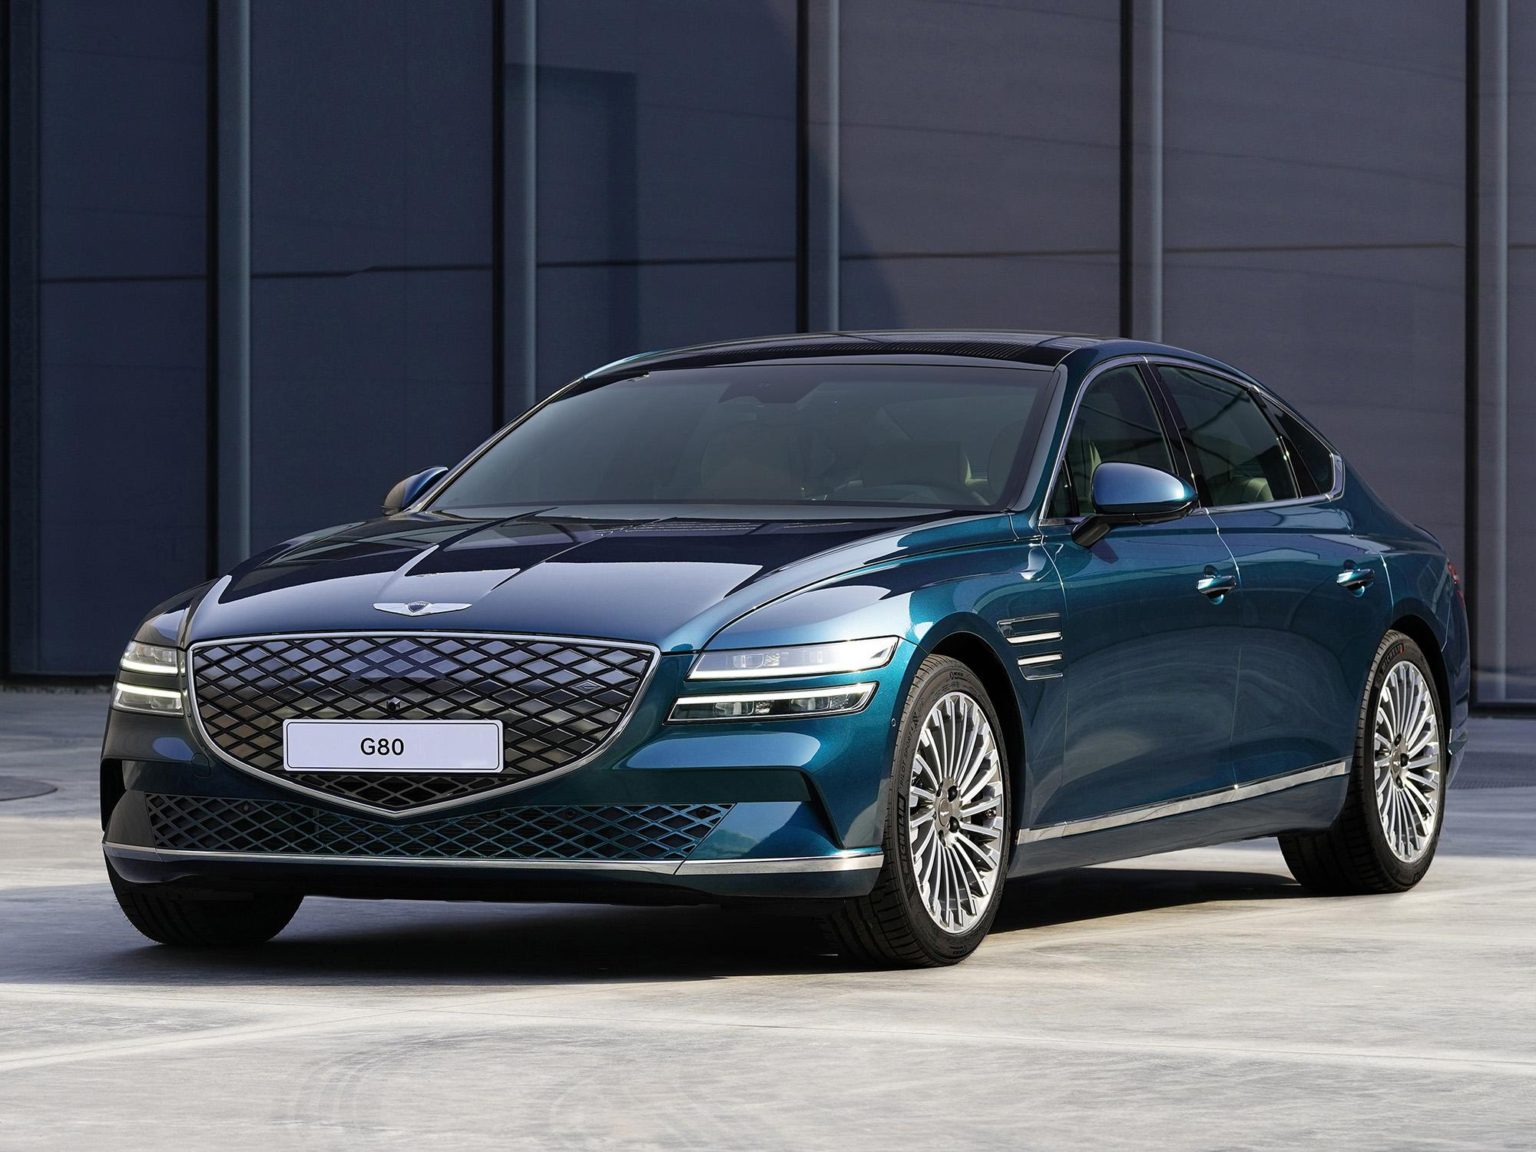 The Electrified G80 is the company's first electric vehicle.